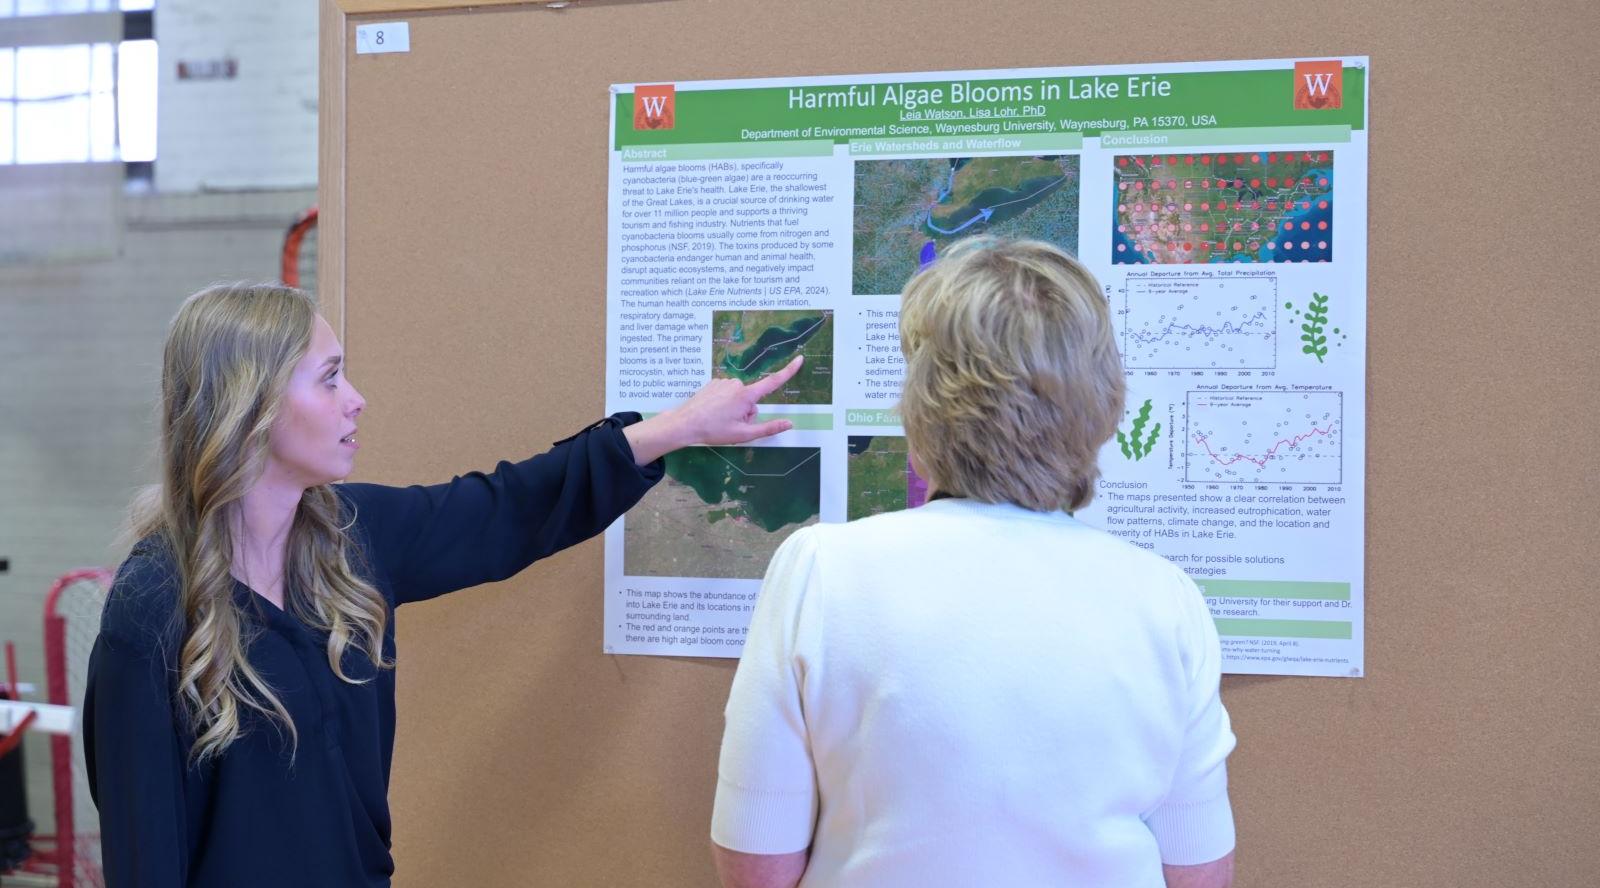 Waynesburg student shows poster presentation to faculty member